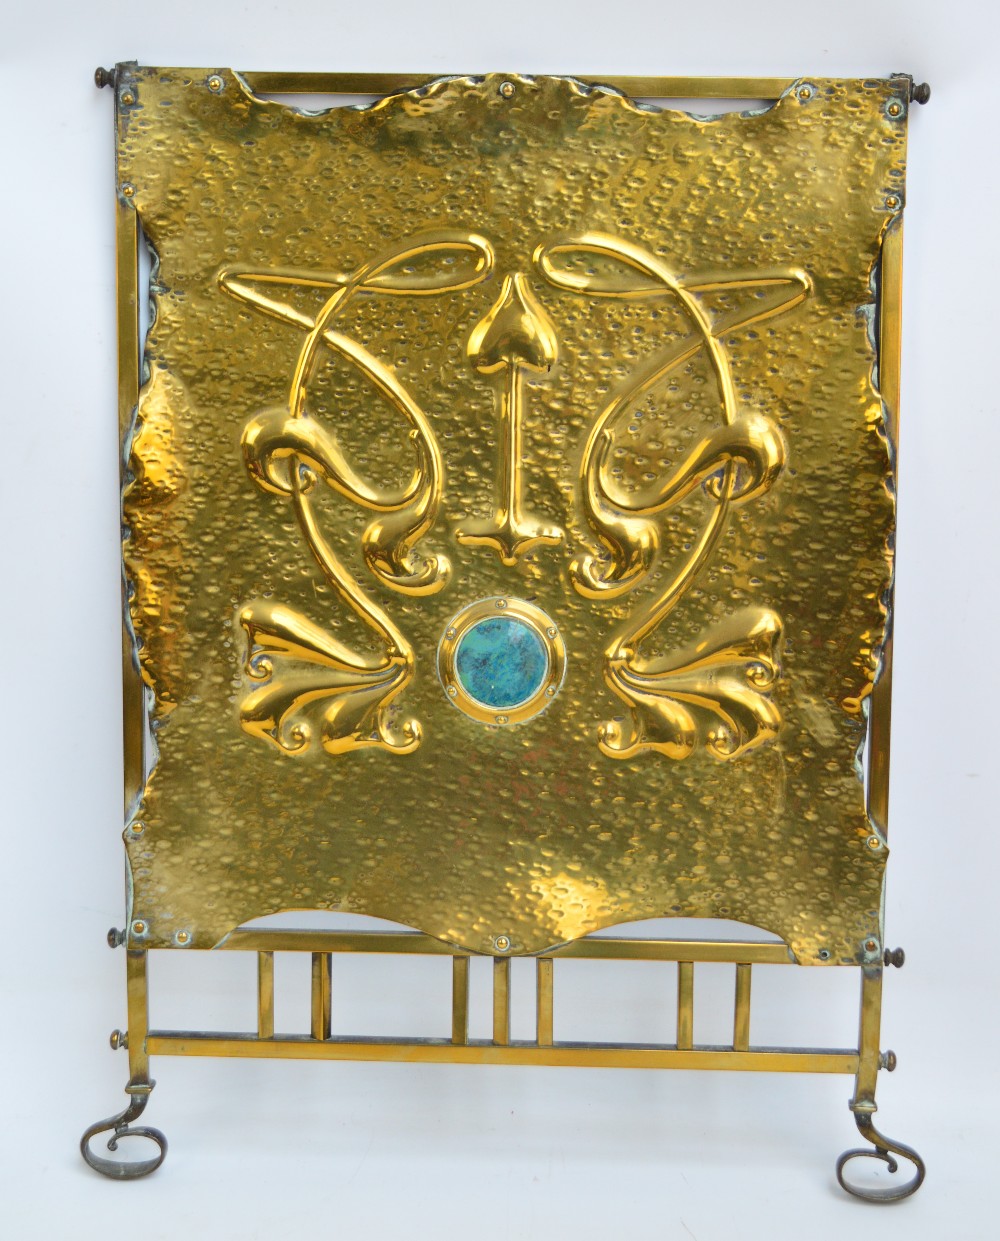 An early 20th century brass fire screen with Art Nouveau decoration of stylised foliage centred on a